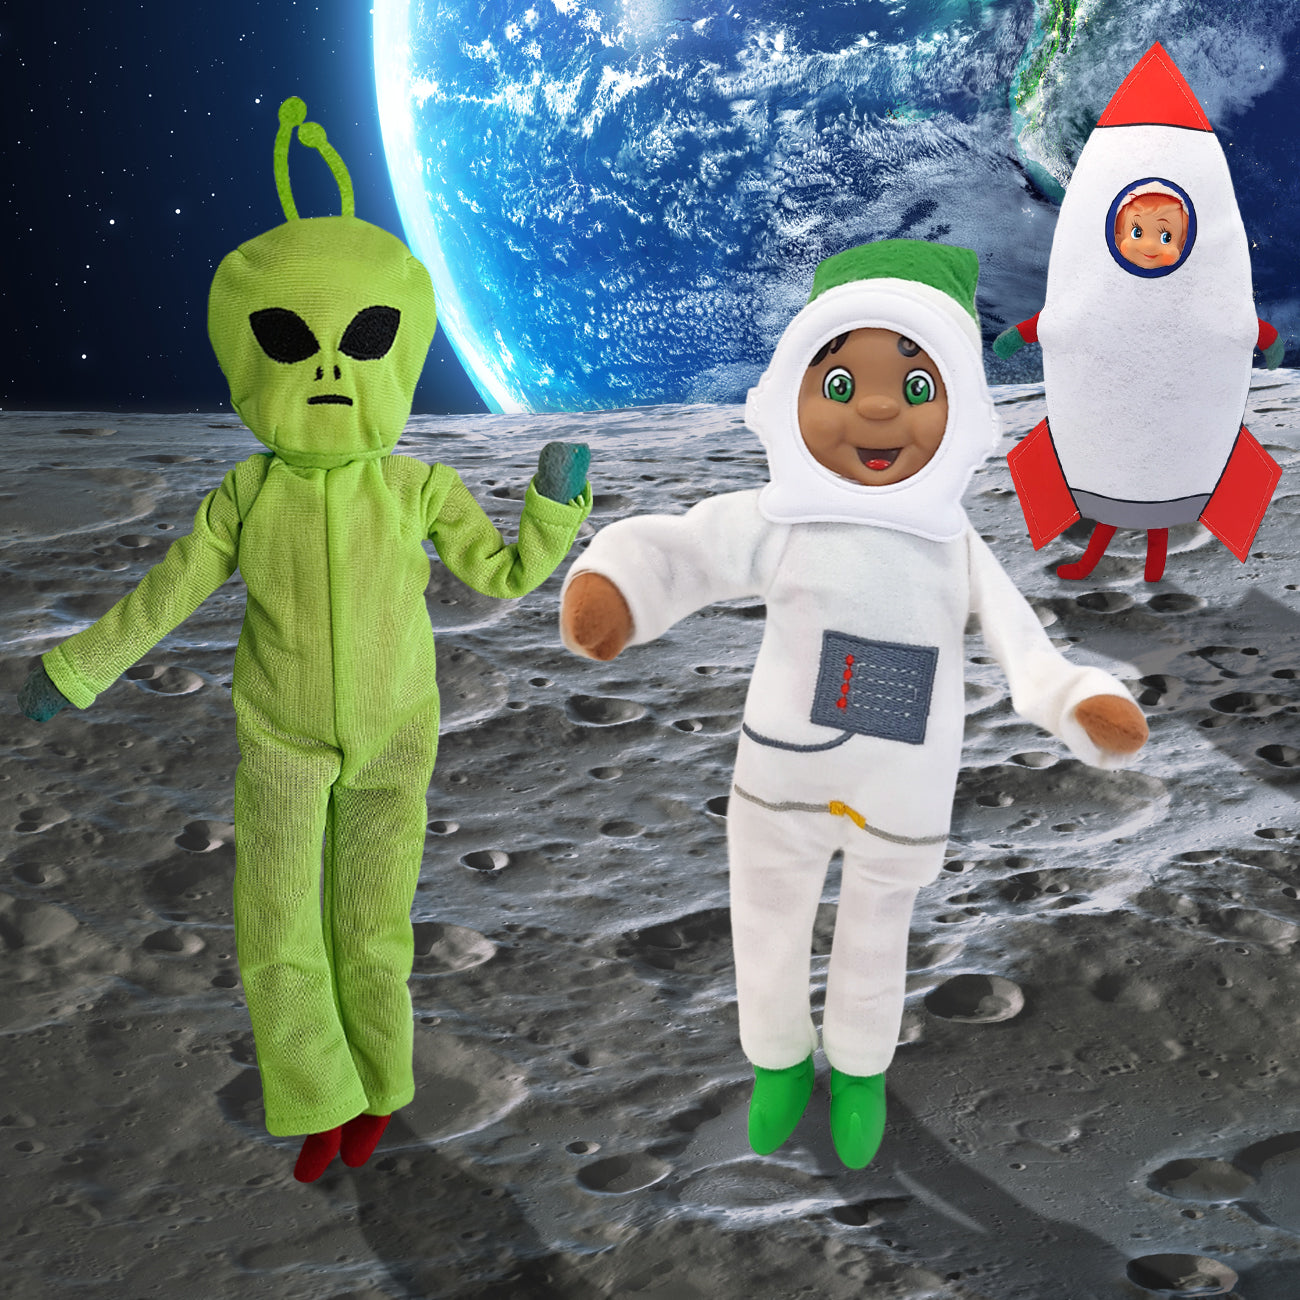 Elf Space scene. One elf is dressed as an astronaut another is an alien and the third is a rocketship